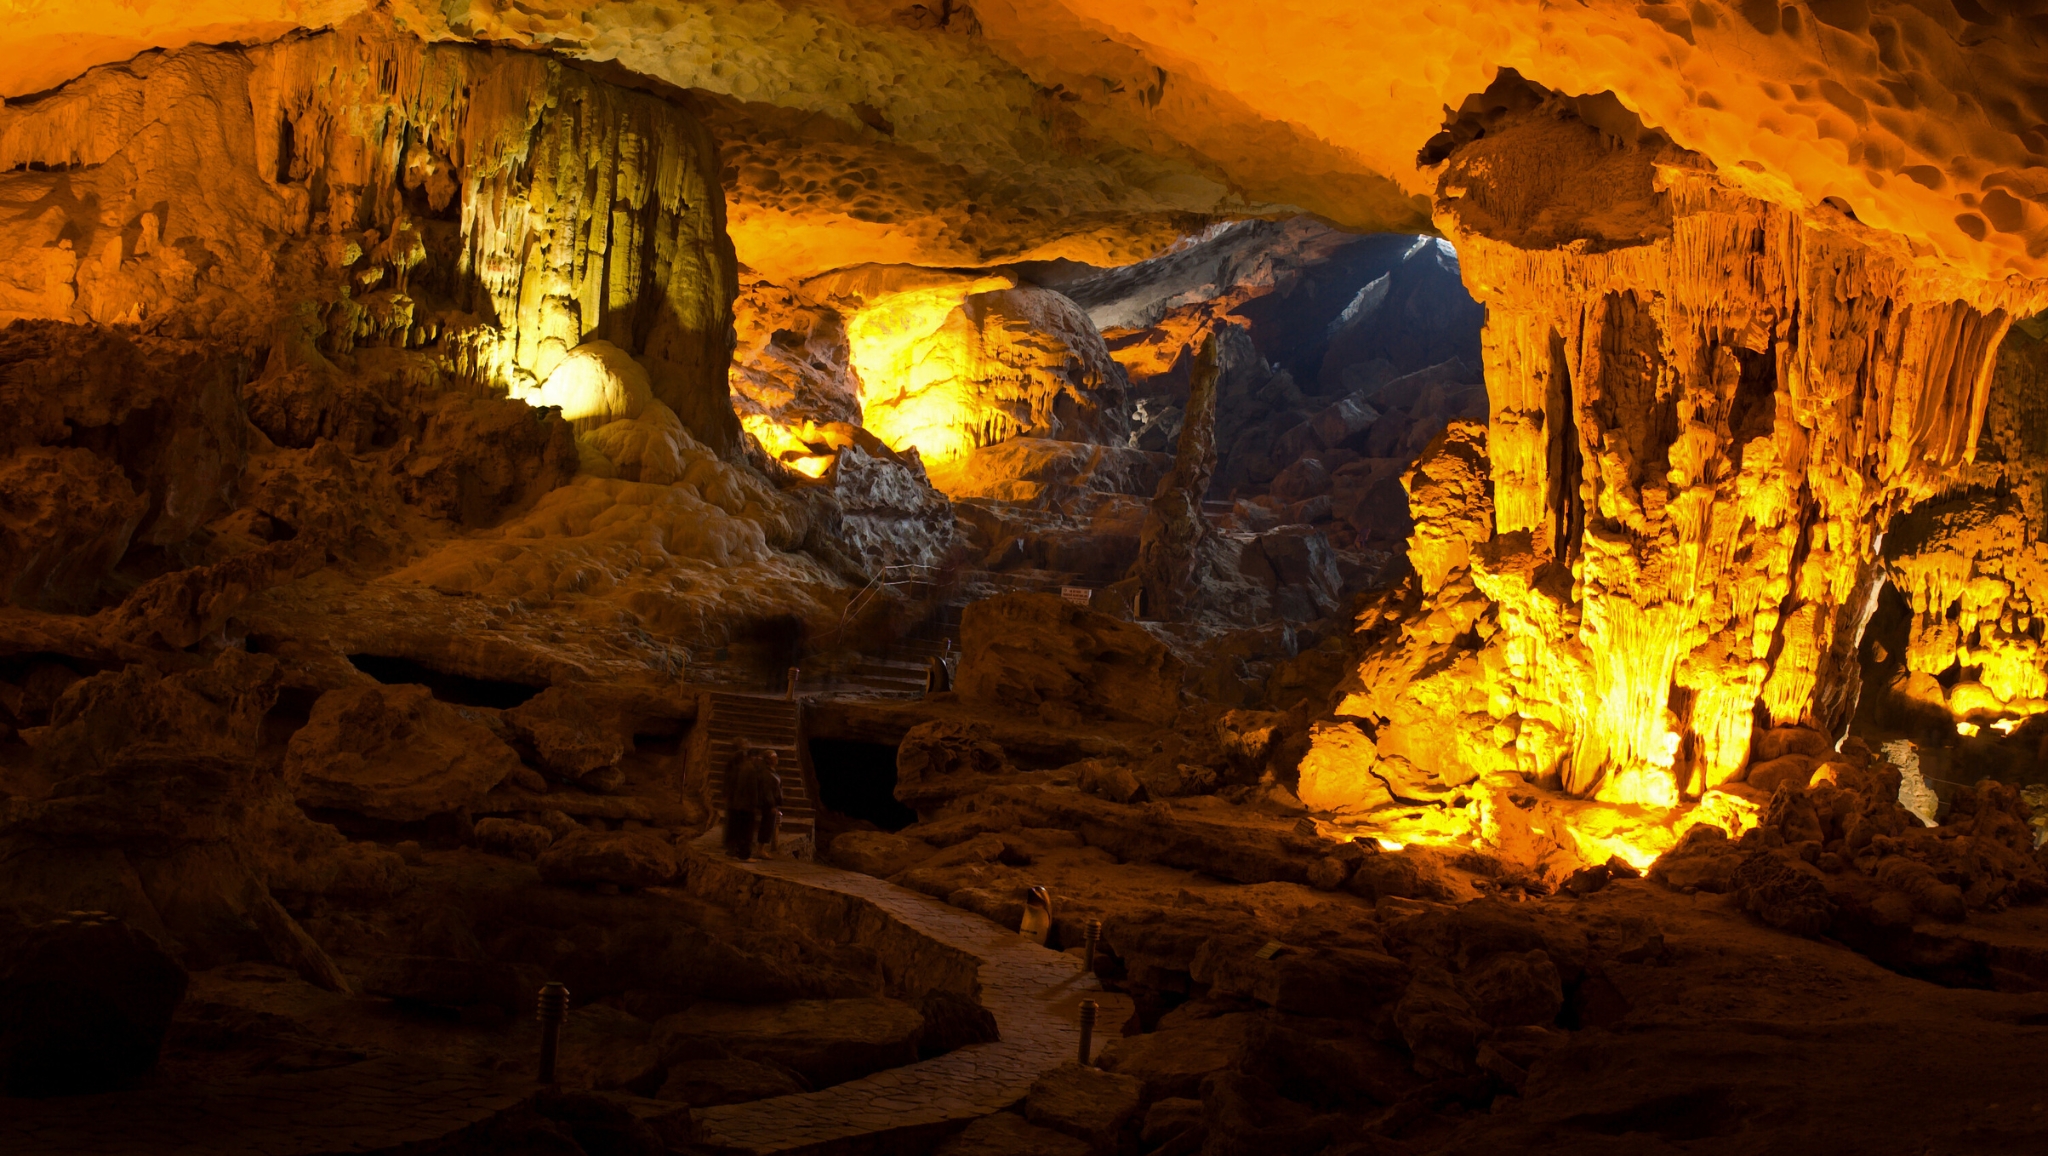 Chance To See The Beauty Of Sung Sot Cave